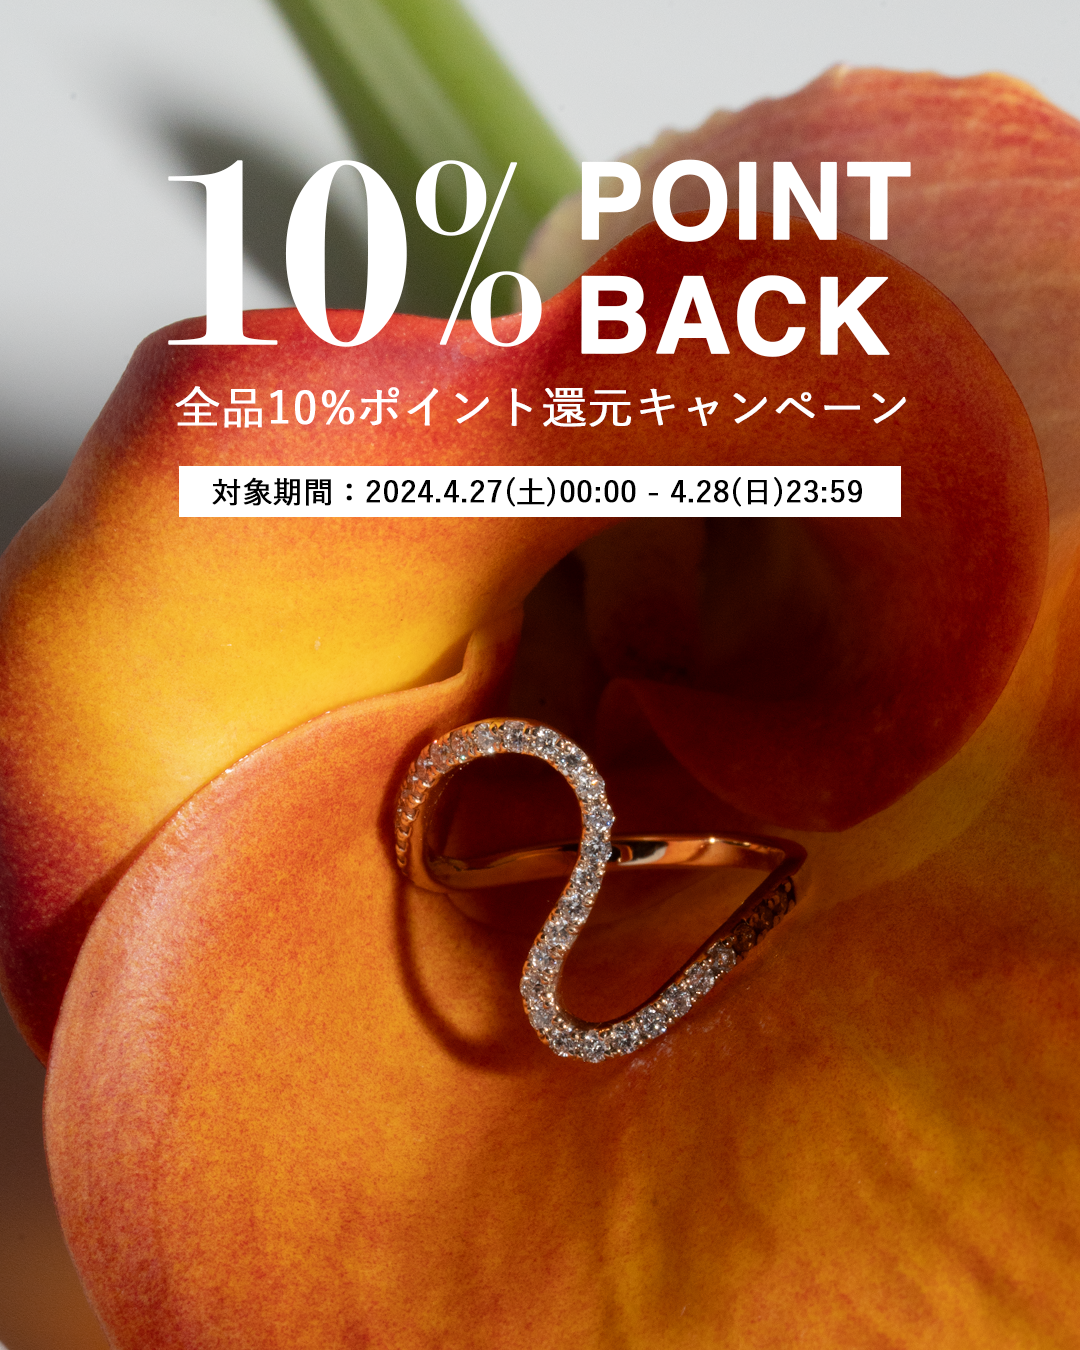 PRMAL 10% Point Back Campaign